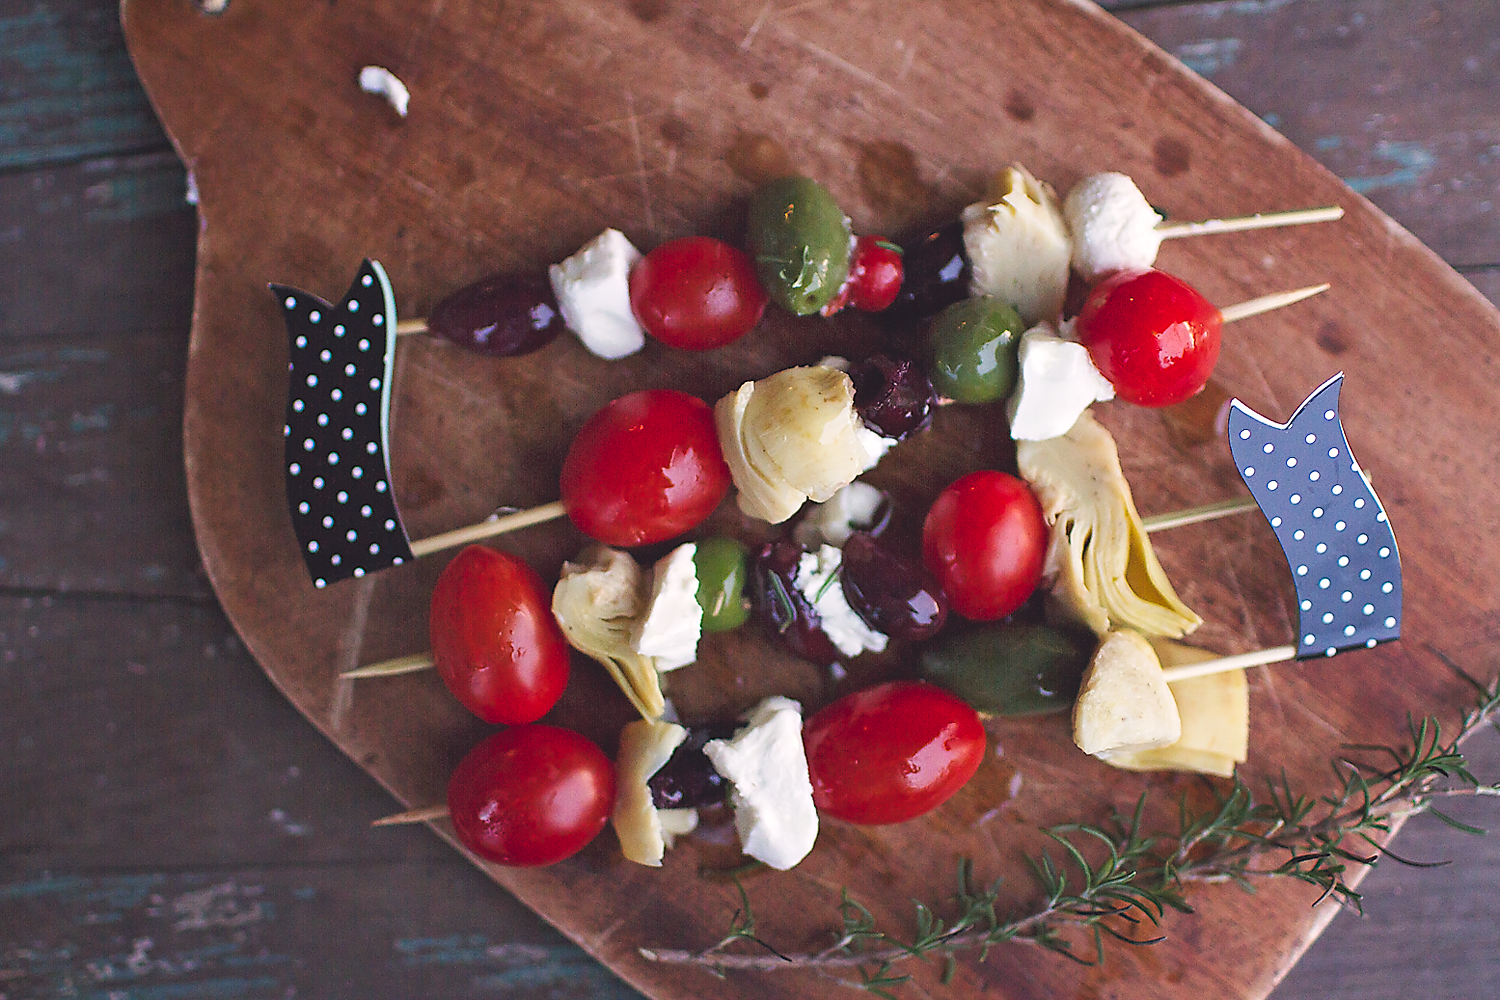 Add something a little different to your holiday table this year! Antipasto Skewers with Mezzetta make the perfect festive appetizers and the recipe is so simple! Easy, real food.